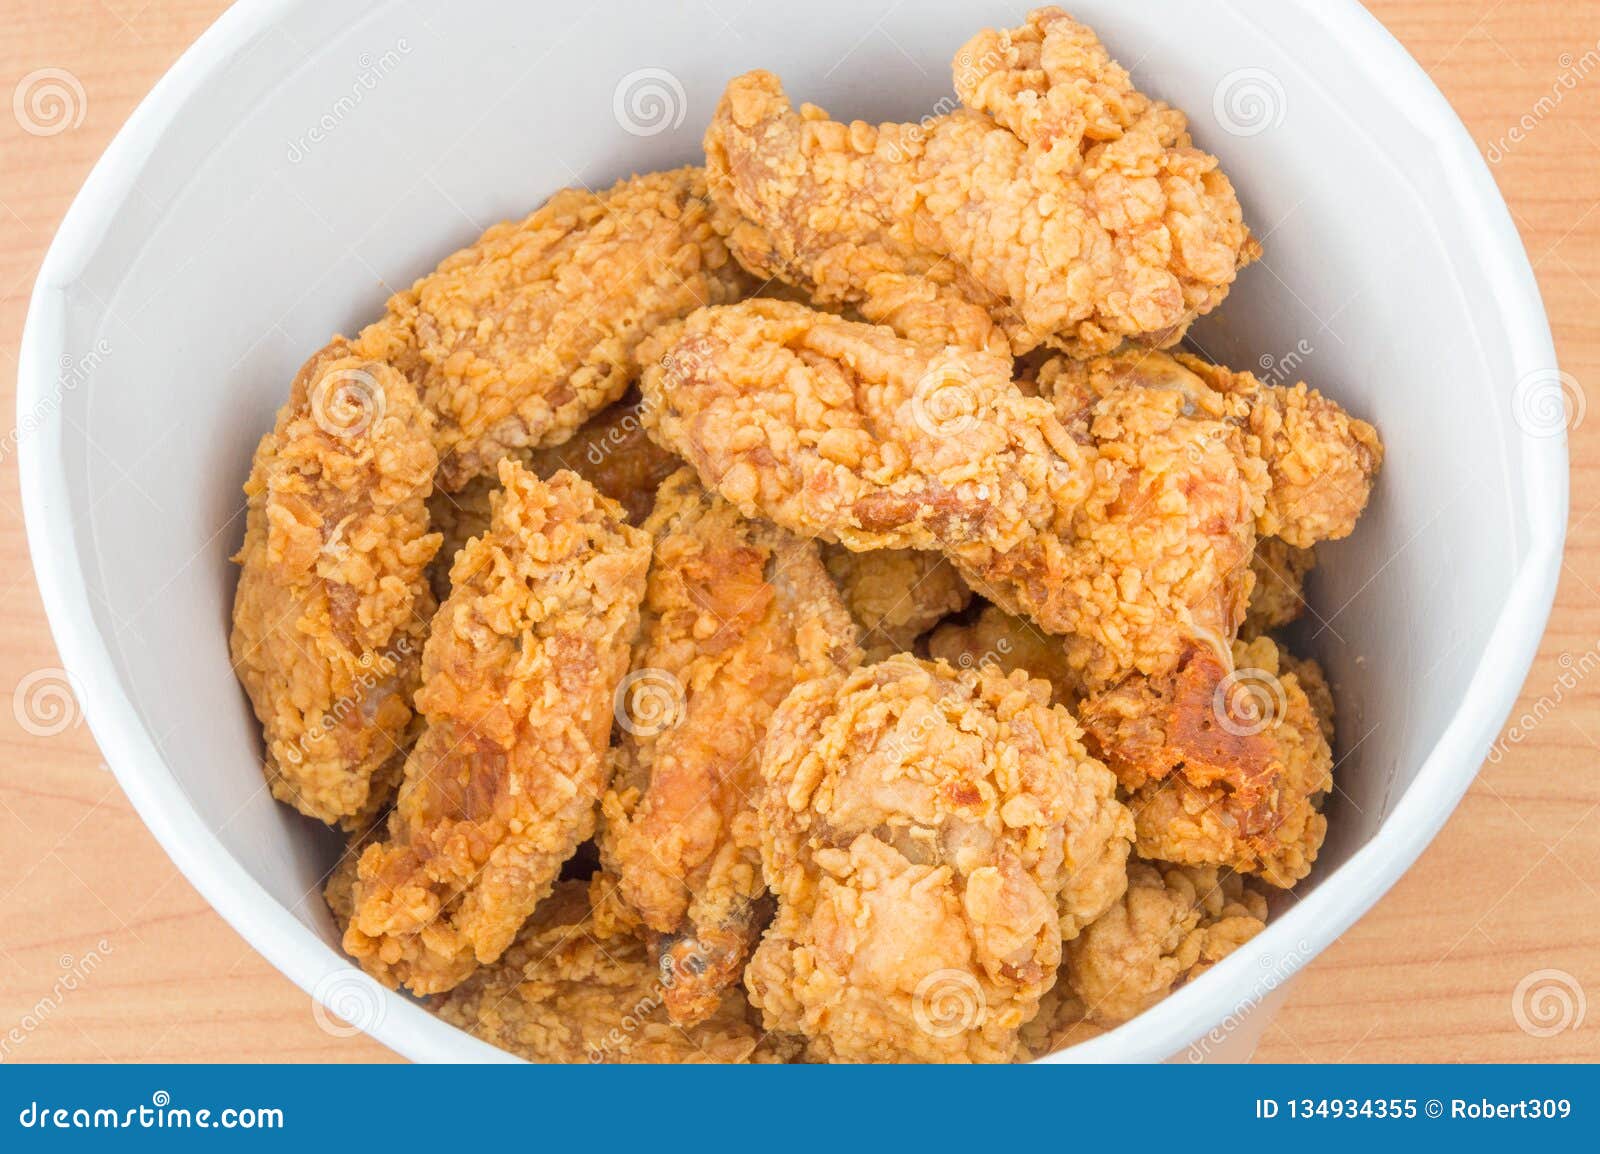 Fried Chicken Hot Wings From Kfc Kentucky Fried Chicken Fast Food. Kfc  Chicken Hot Wings In Bucket Of Kfc Editorial Image - Image Of Pruszcz,  Dinner: 134934355